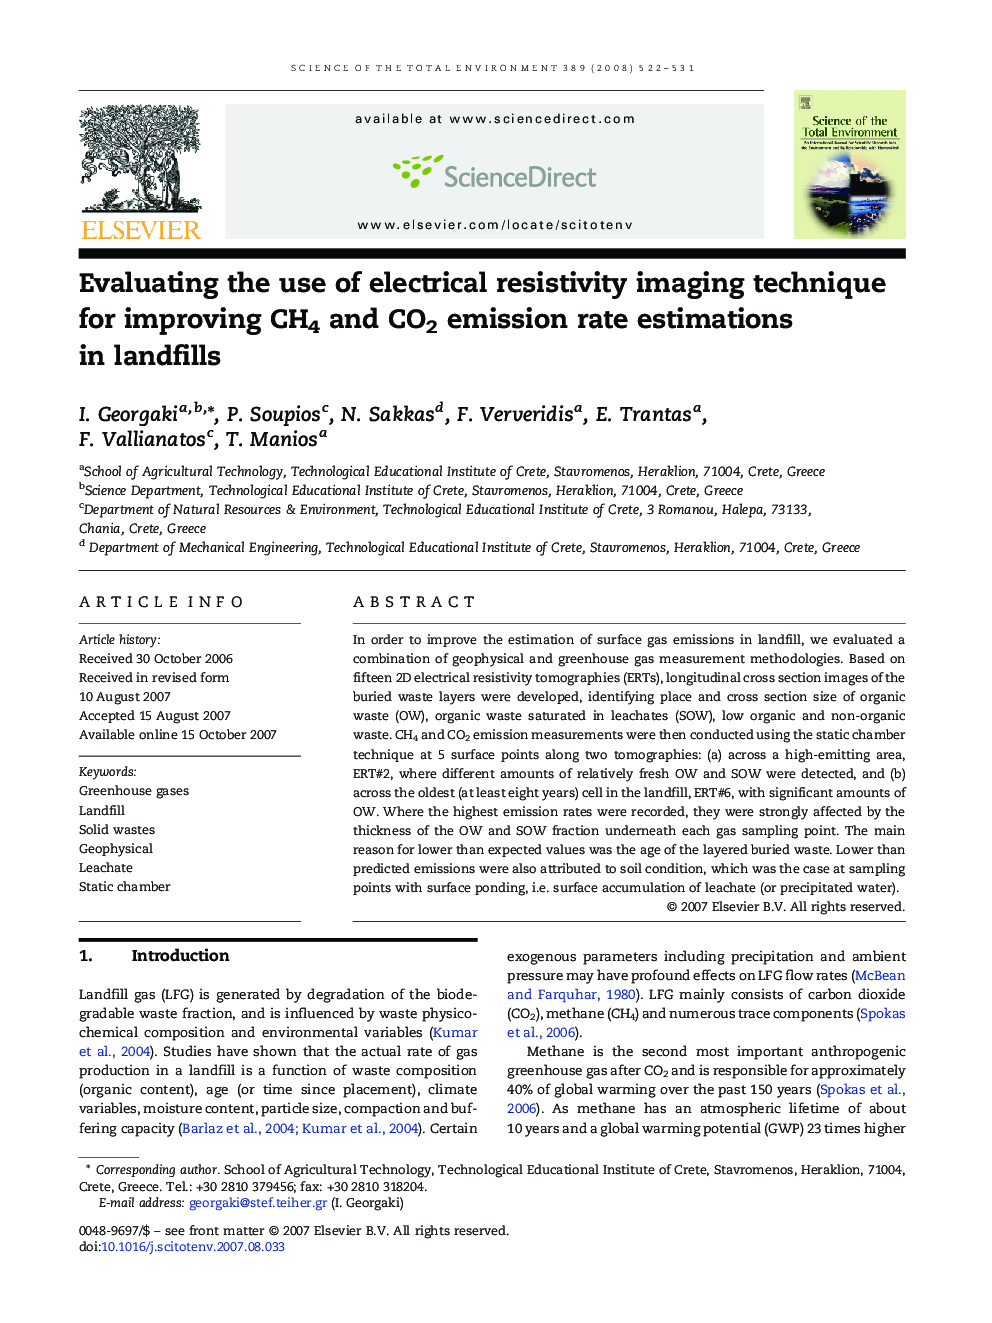 Evaluating the use of electrical resistivity imaging technique for improving CH4 and CO2 emission rate estimations in landfills